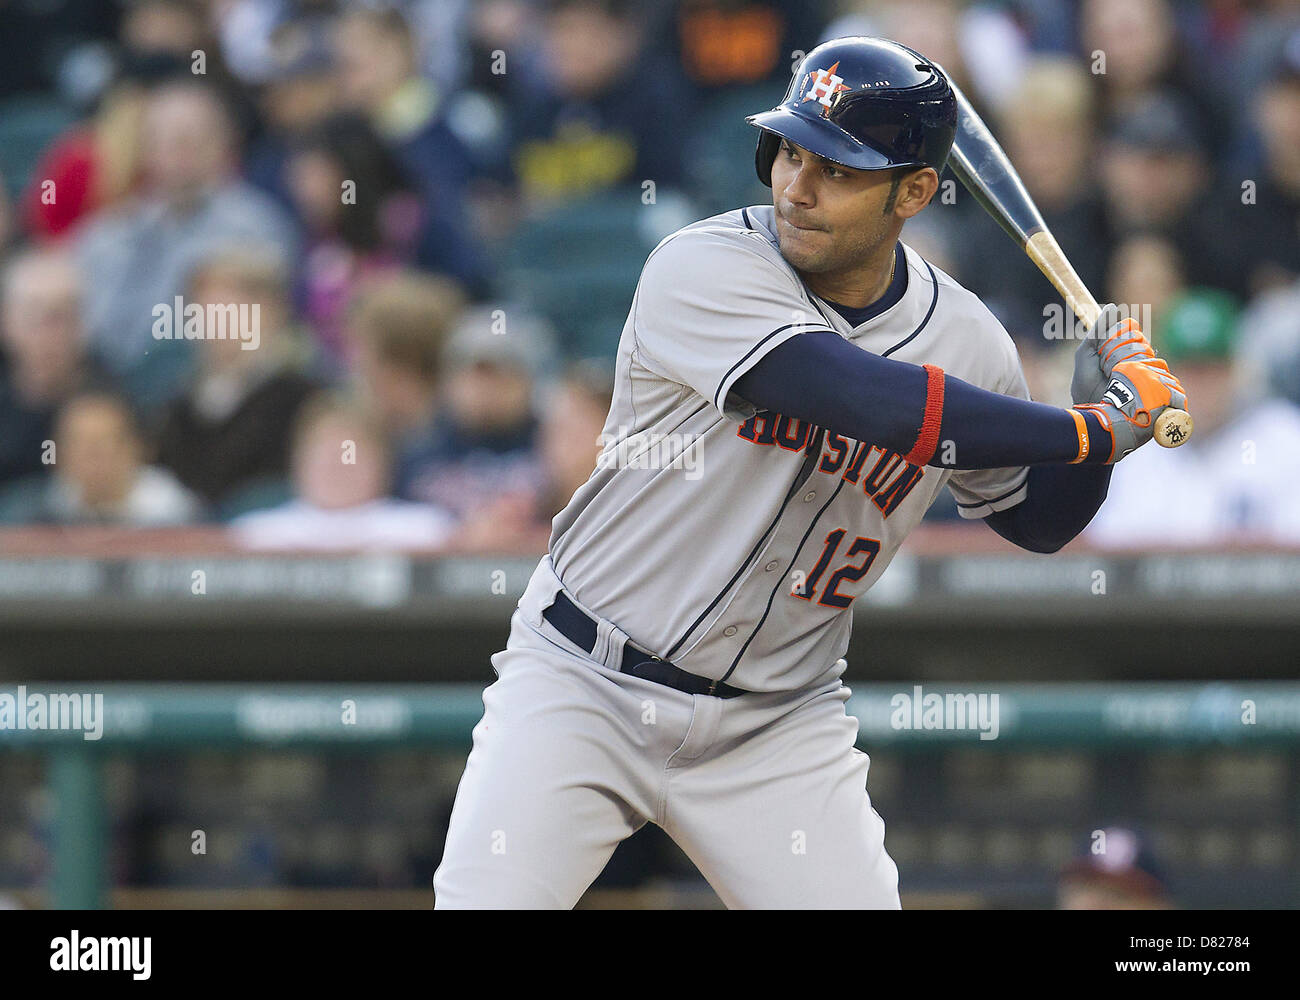 May 13, 2013 - Detroit, Michigan, United States of America - May 13, 2013: Houston Astros infielder Carlos Pena (12) at bat during MLB game action between the Houston Astros and the Detroit Tigers at Comerica Park in Detroit, Michigan. The Tigers defeated the Astros 7-2. Stock Photo